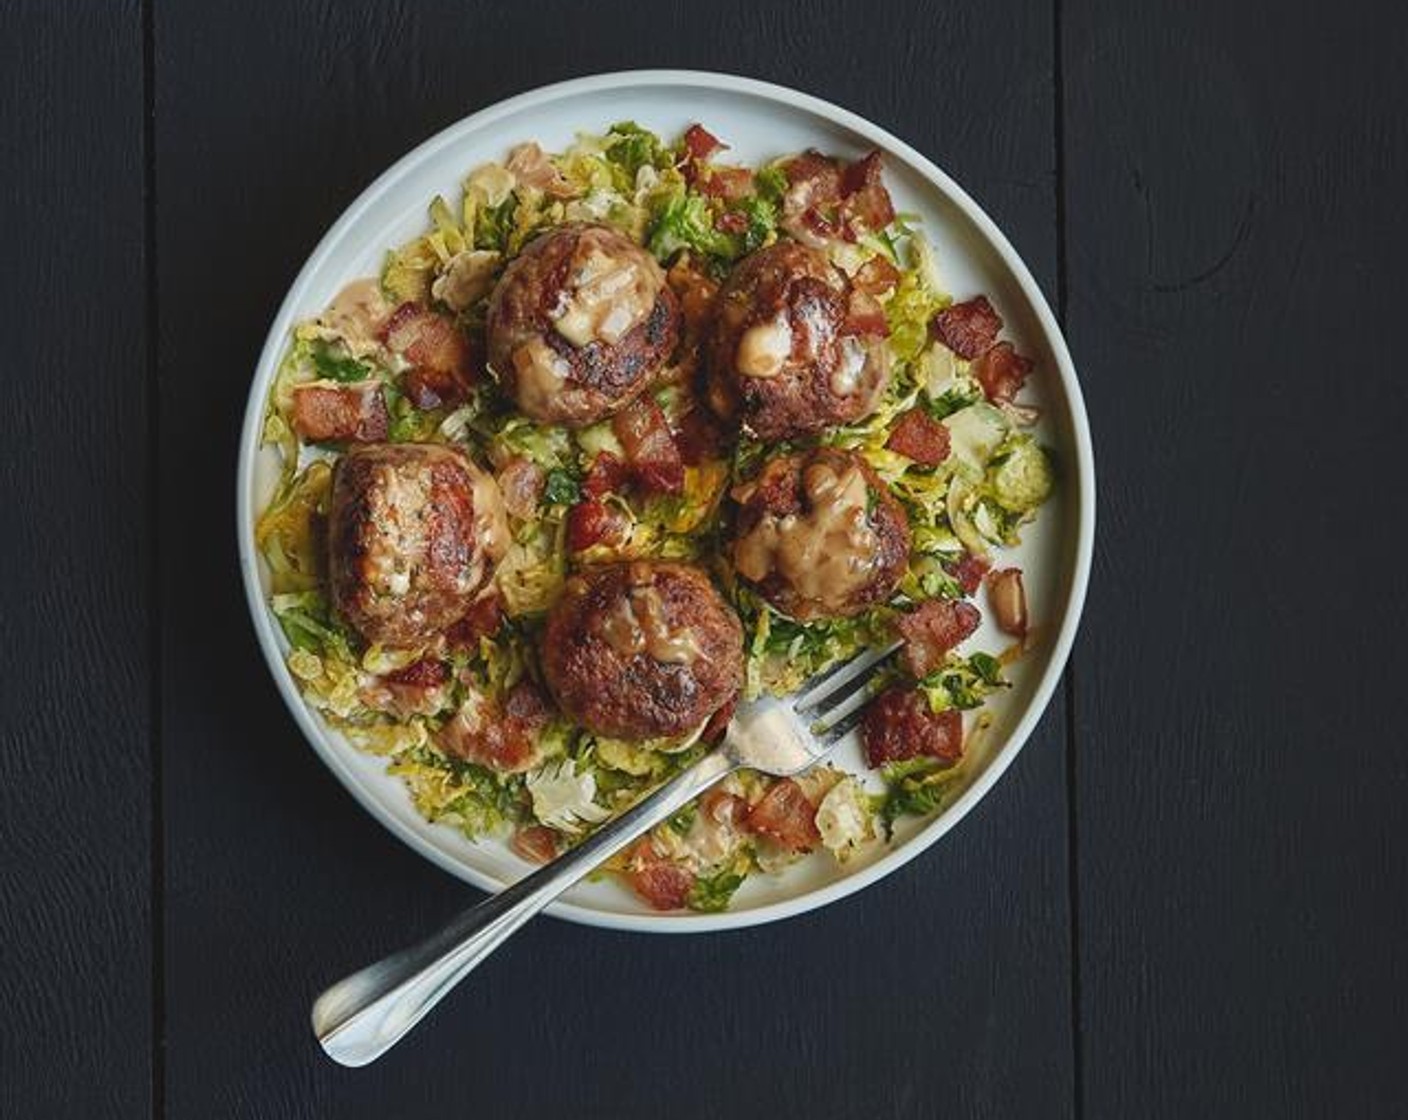 Braised Pork Meatballs with Brussels Sprouts